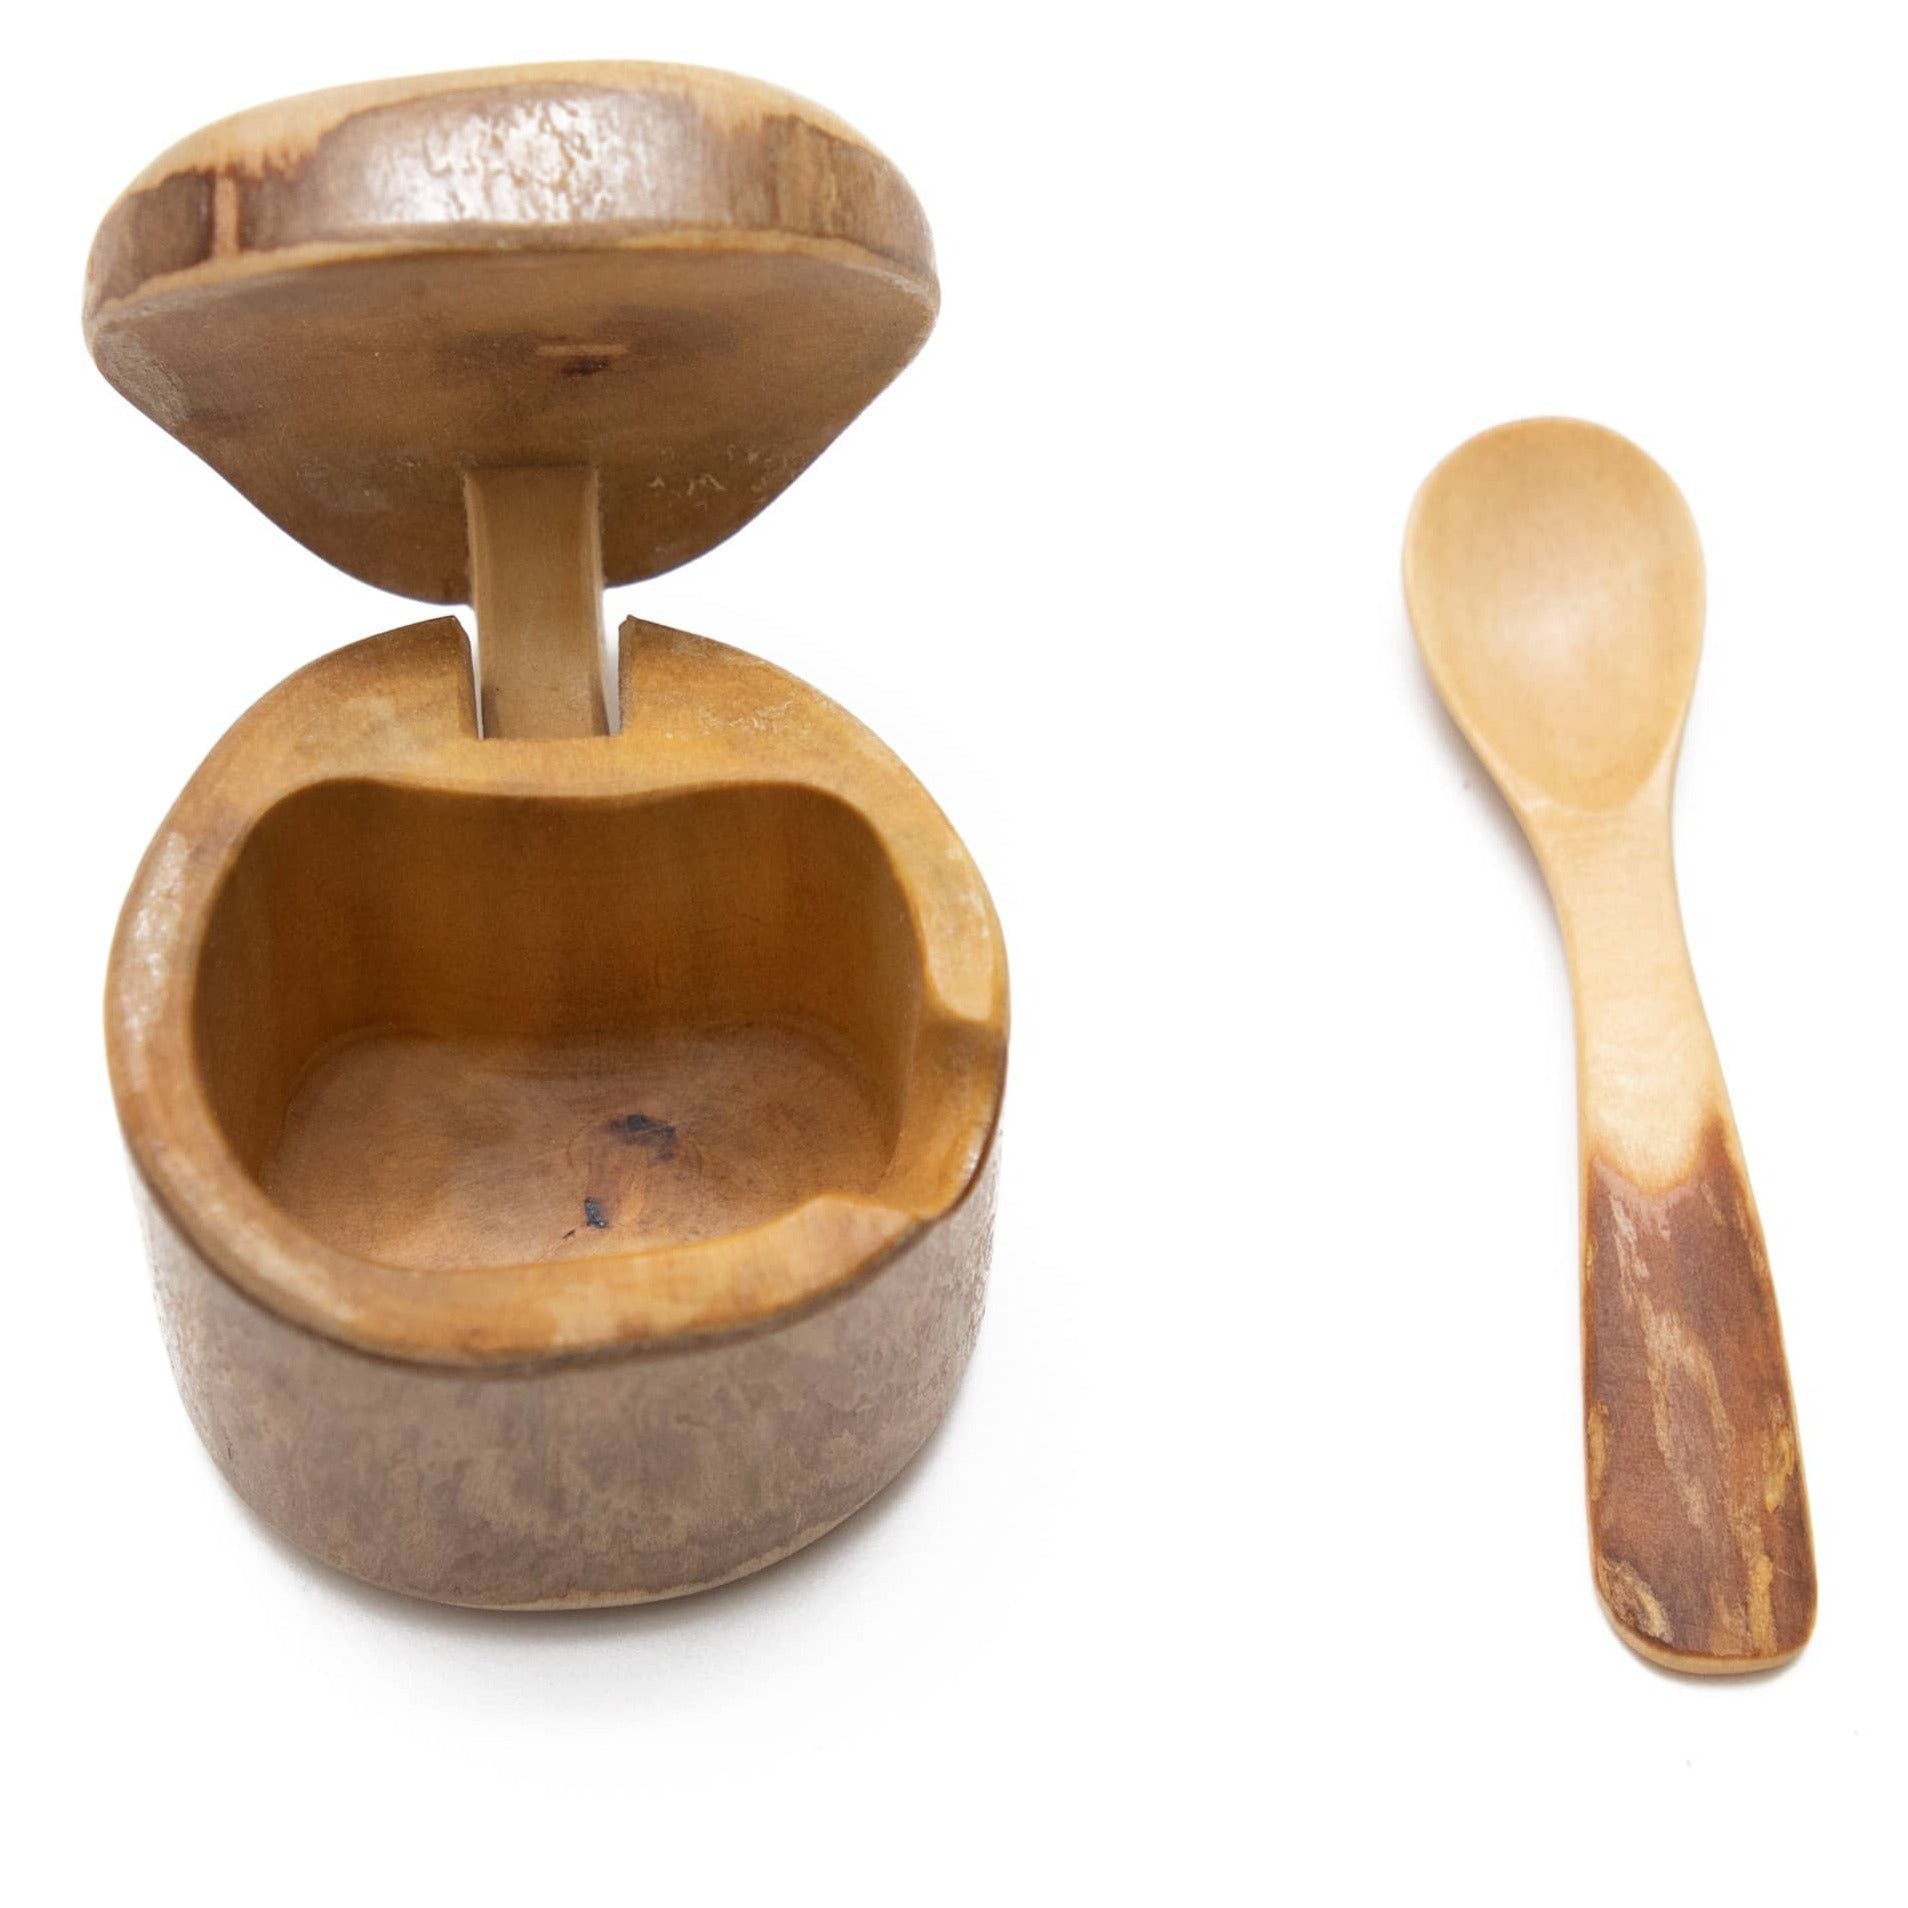 Mini Coffeewood Salt Box & Spoon: Sustainable spice storage, fair trade charm. Reclaimed wood, handmade, adorable! Shop now & add eco-magic to your kitchen! ✨